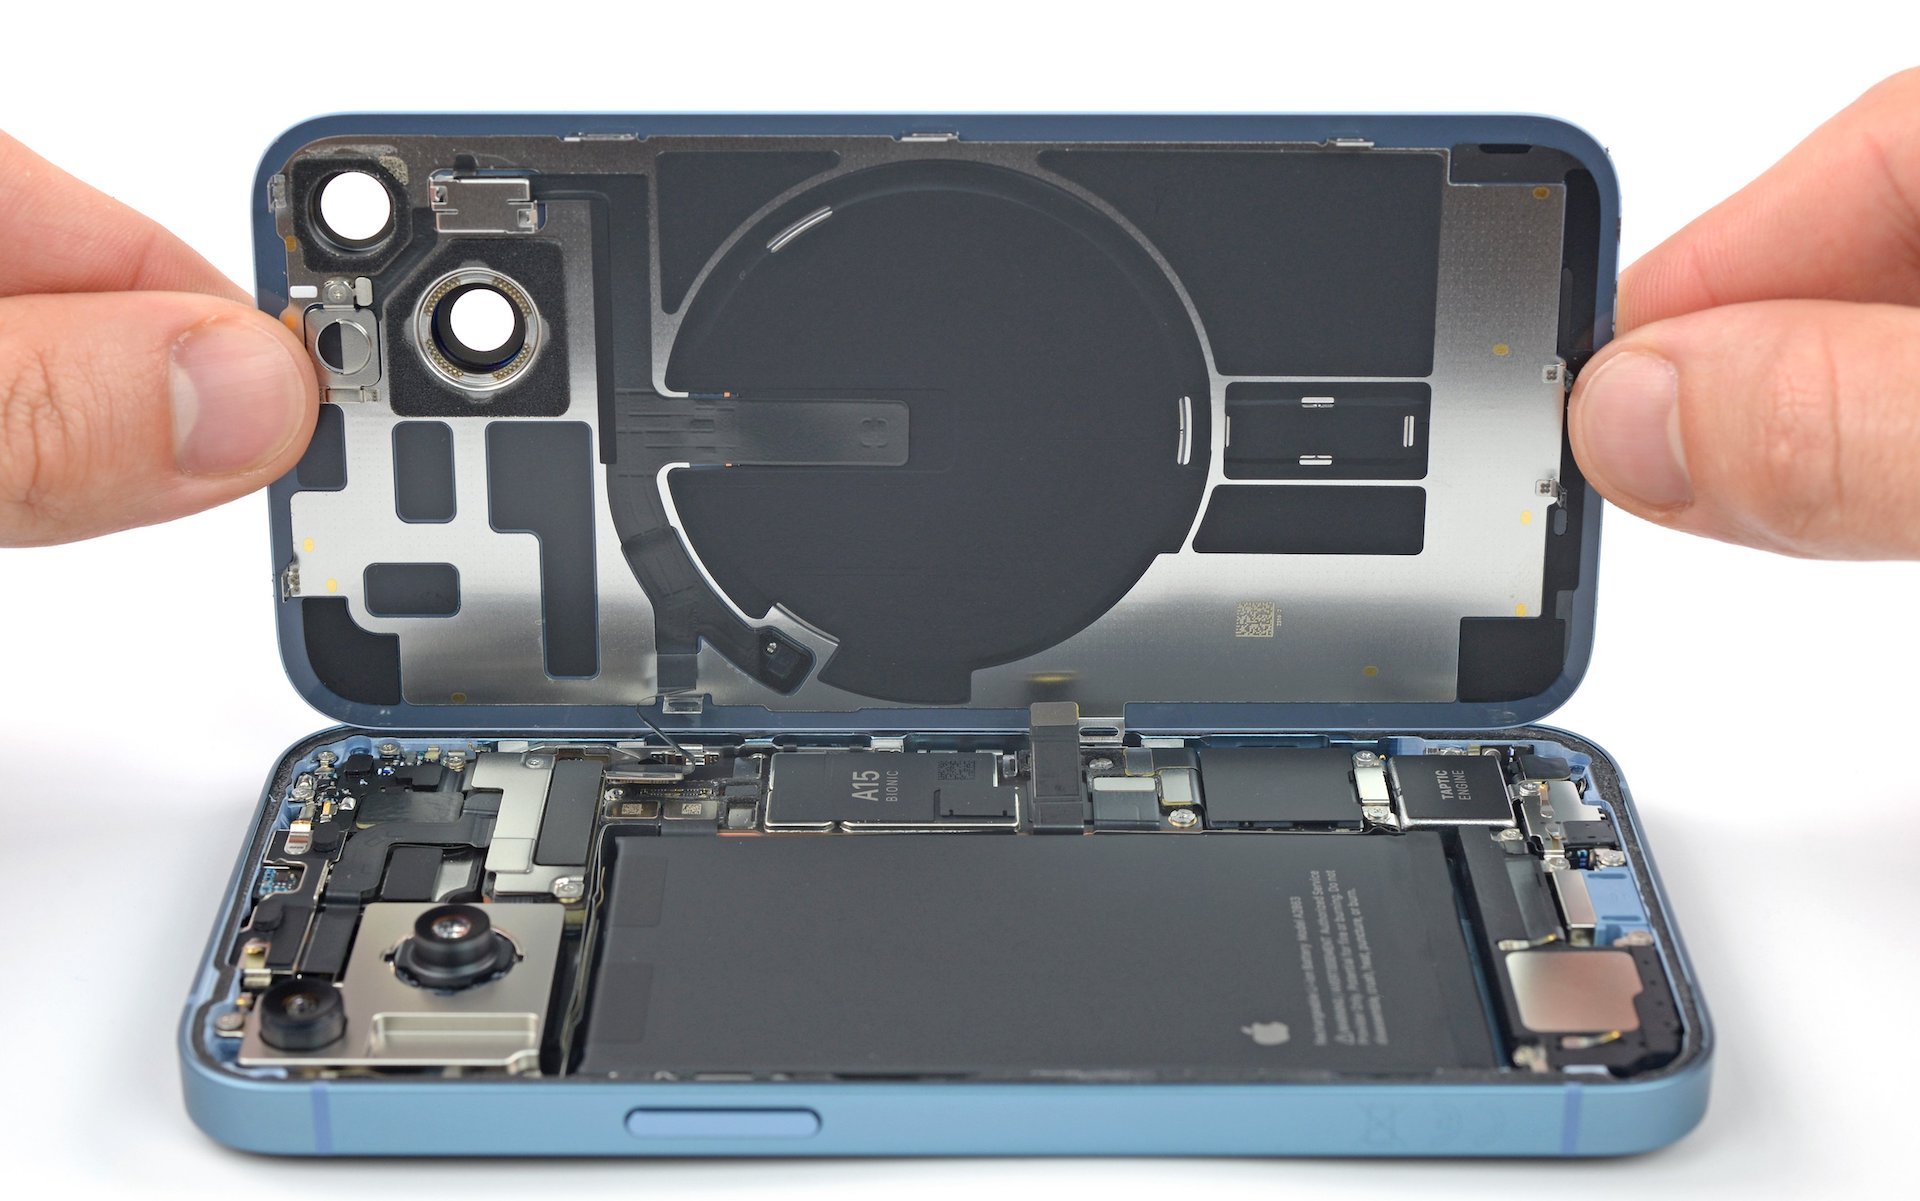 iFixit: "The iPhone 14 is the smartphone you should buy." It has the highest repairability score since the iPhone 7. JerryRigEverything confirms